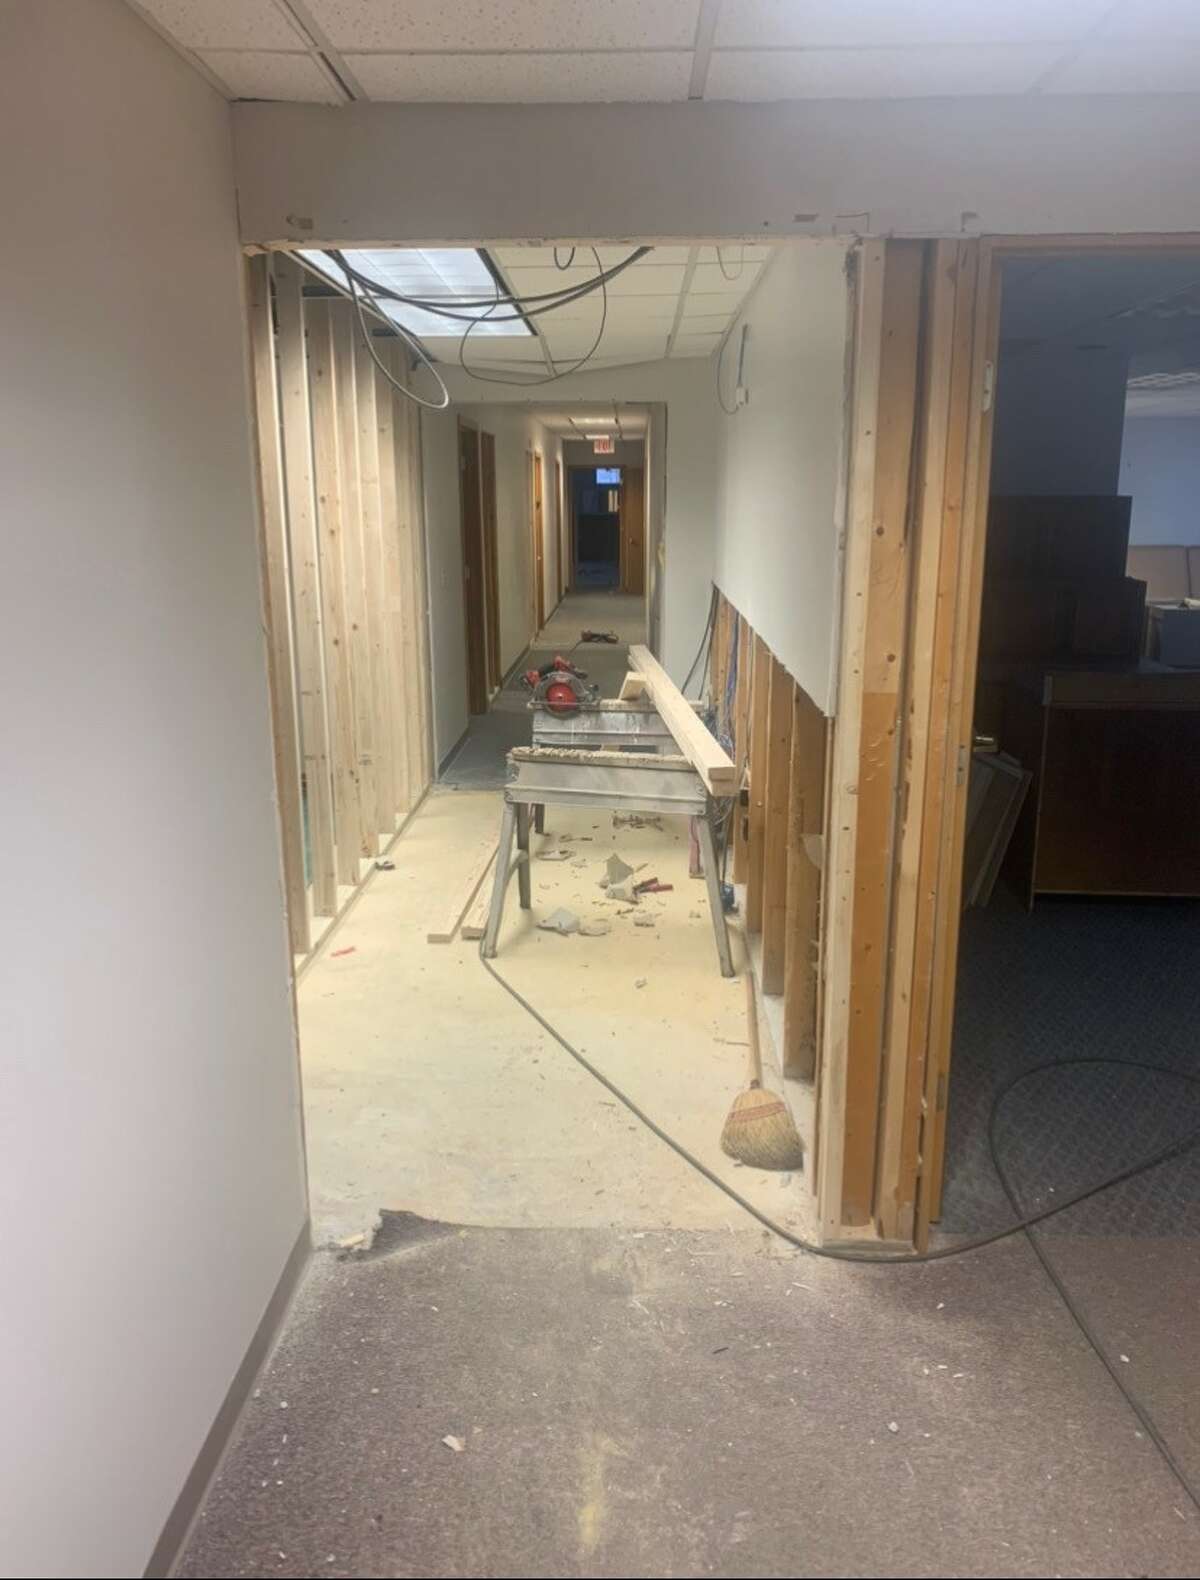 Renovations are underway at a former doctor's office in Reed City, which will soon open as the newest location of Huntey's Clubhouse childcare center.